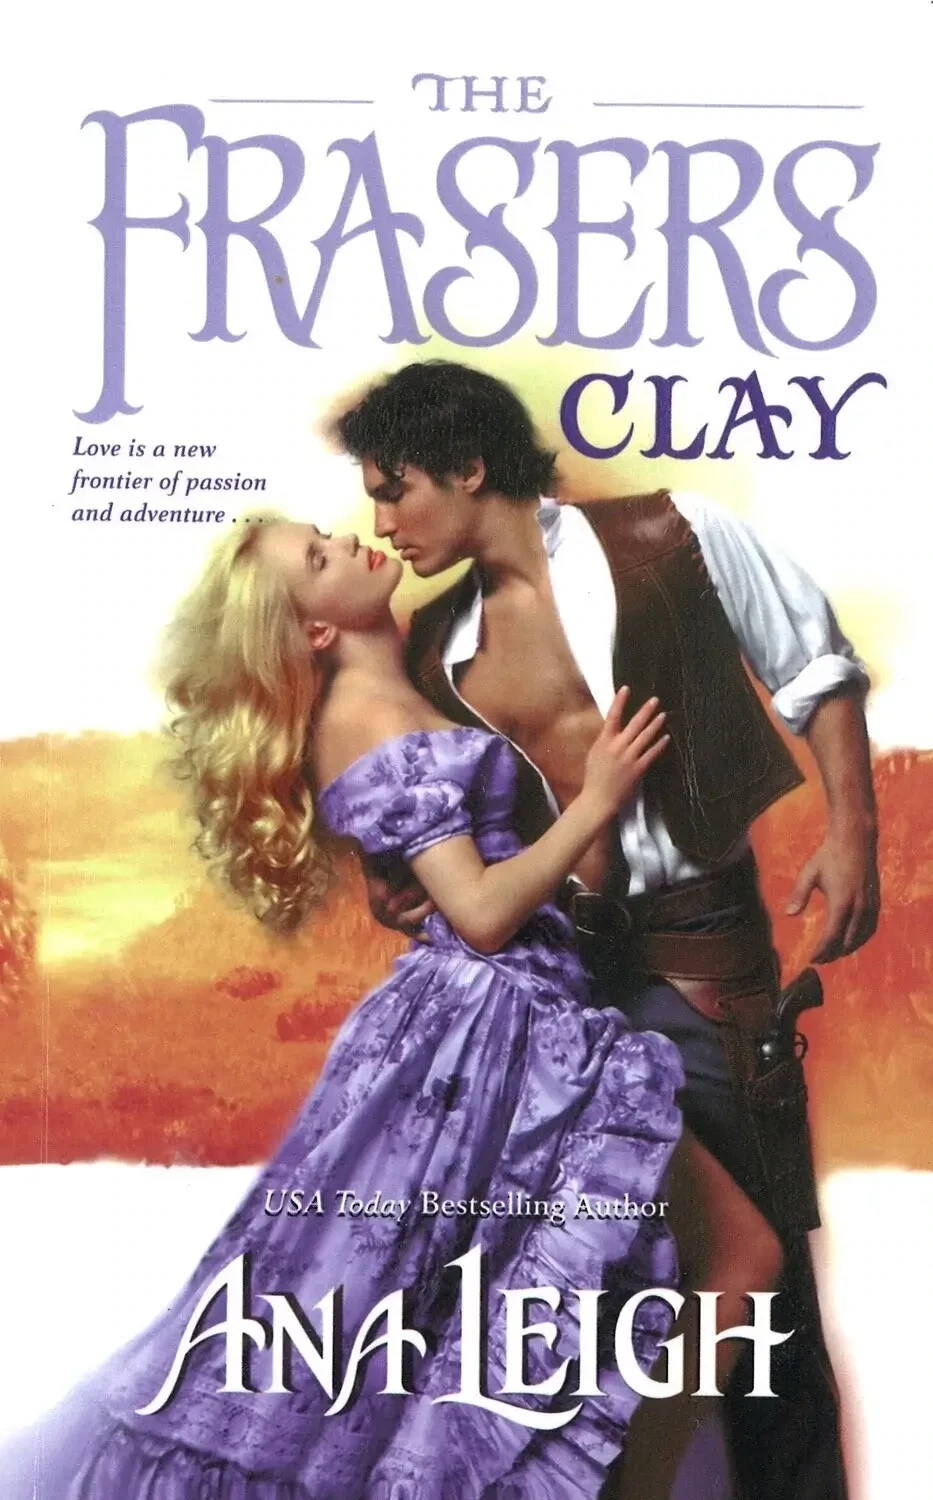 The Frasers: Clay by Ana Leigh